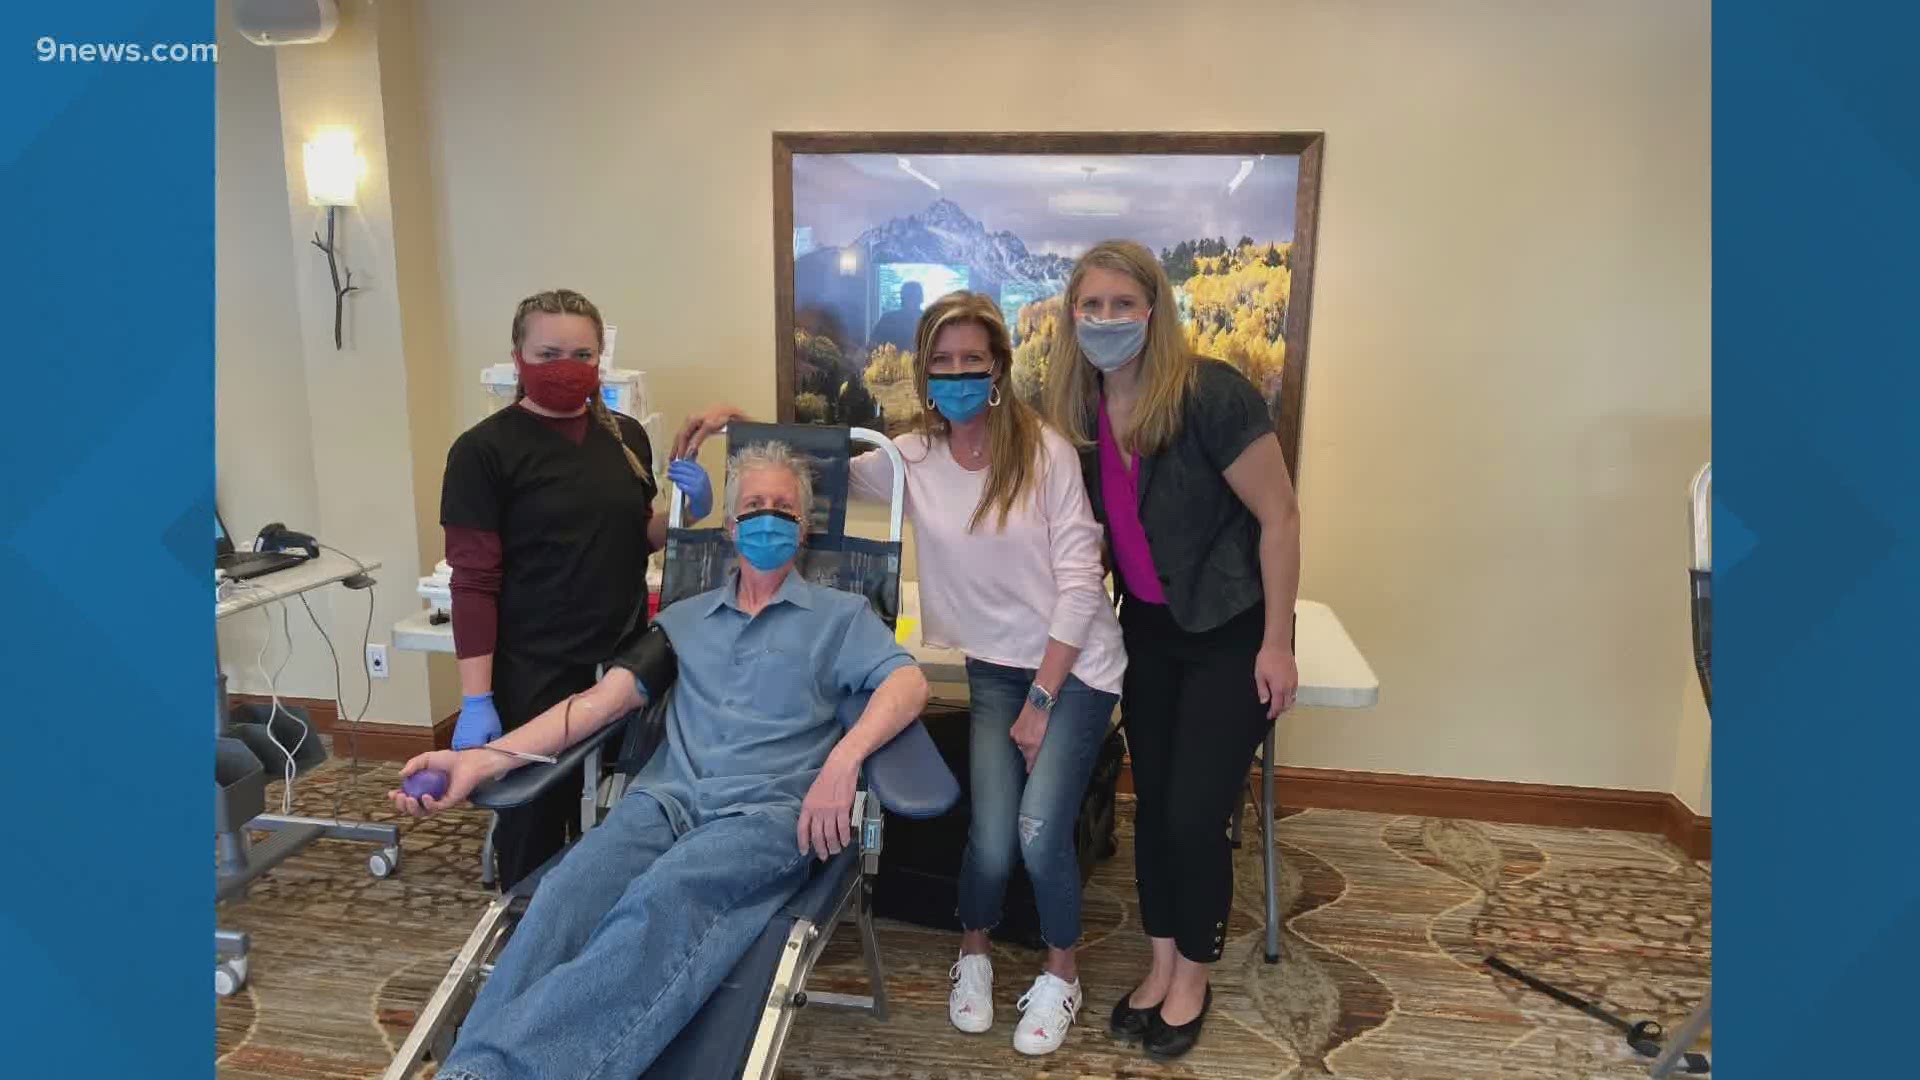 Recovered COVID-19 patients from the Vail Valley organized a plasma drive in the hopes of helping other patients beat the virus.